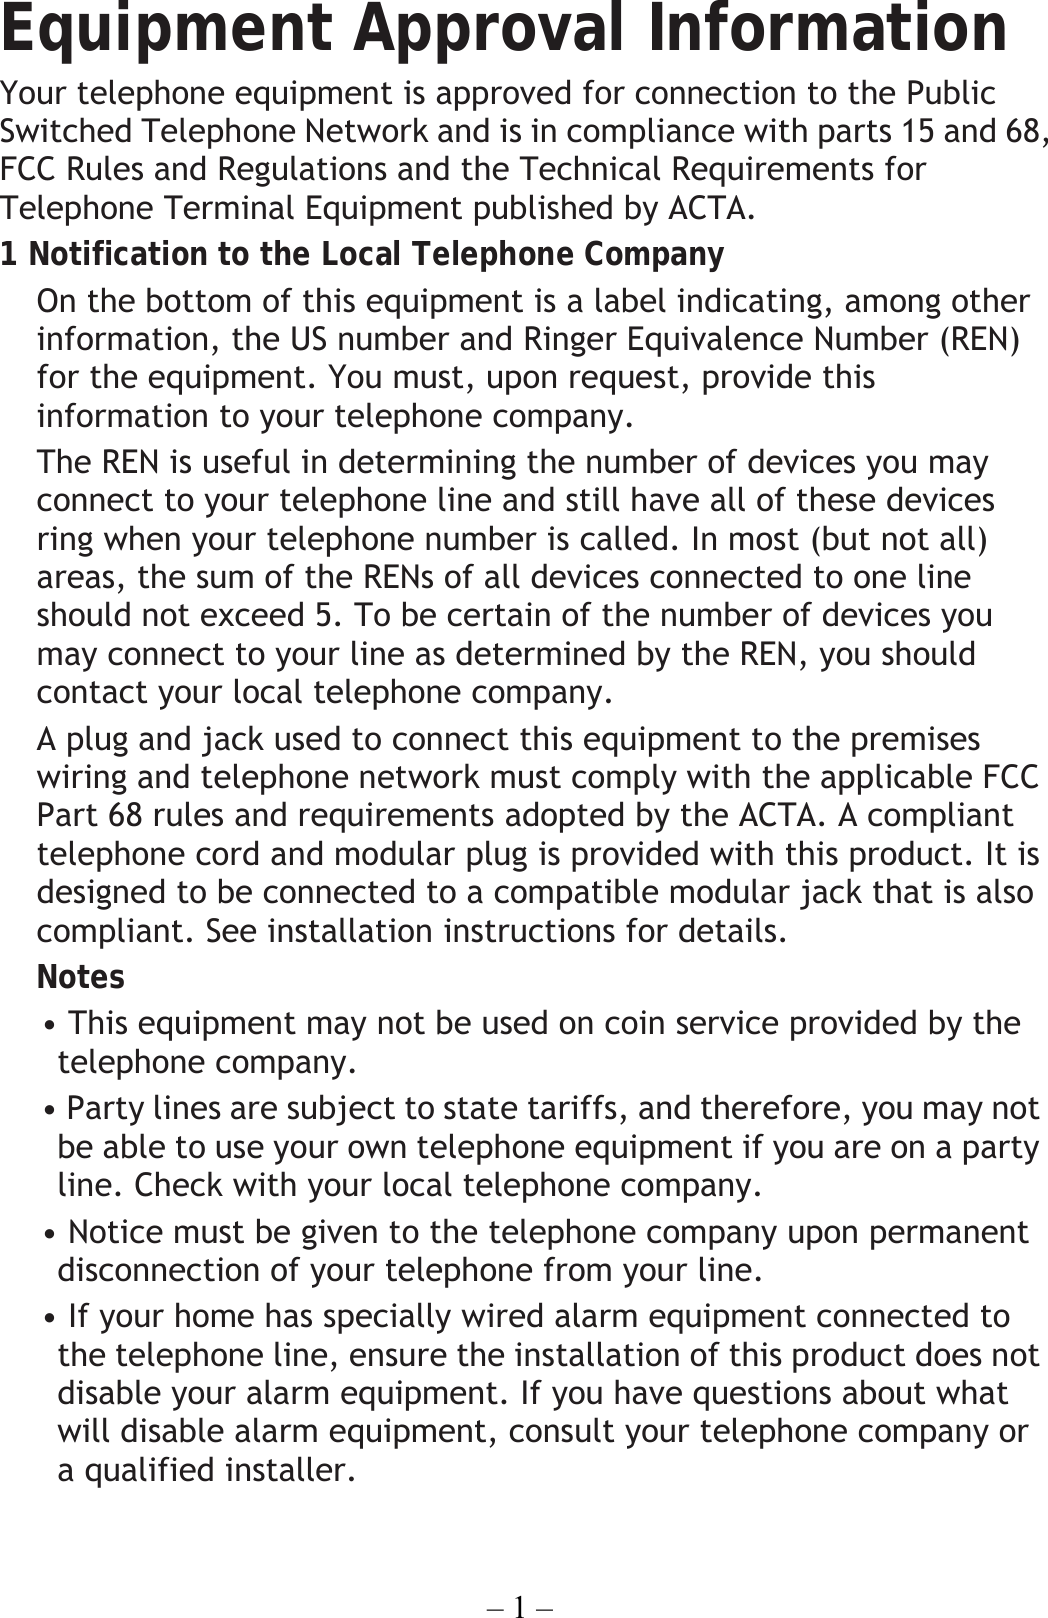 – 1 – Equipment Approval Information Your telephone equipment is approved for connection to the Public Switched Telephone Network and is in compliance with parts 15 and 68, FCC Rules and Regulations and the Technical Requirements for Telephone Terminal Equipment published by ACTA. 1 Notification to the Local Telephone Company On the bottom of this equipment is a label indicating, among other information, the US number and Ringer Equivalence Number (REN) for the equipment. You must, upon request, provide this information to your telephone company. The REN is useful in determining the number of devices you may connect to your telephone line and still have all of these devices ring when your telephone number is called. In most (but not all) areas, the sum of the RENs of all devices connected to one line should not exceed 5. To be certain of the number of devices you may connect to your line as determined by the REN, you should contact your local telephone company. A plug and jack used to connect this equipment to the premises wiring and telephone network must comply with the applicable FCC Part 68 rules and requirements adopted by the ACTA. A compliant telephone cord and modular plug is provided with this product. It is designed to be connected to a compatible modular jack that is also compliant. See installation instructions for details. Notes   • This equipment may not be used on coin service provided by the telephone company. • Party lines are subject to state tariffs, and therefore, you may not be able to use your own telephone equipment if you are on a party line. Check with your local telephone company. • Notice must be given to the telephone company upon permanent disconnection of your telephone from your line. • If your home has specially wired alarm equipment connected to the telephone line, ensure the installation of this product does not disable your alarm equipment. If you have questions about what will disable alarm equipment, consult your telephone company or a qualified installer.  